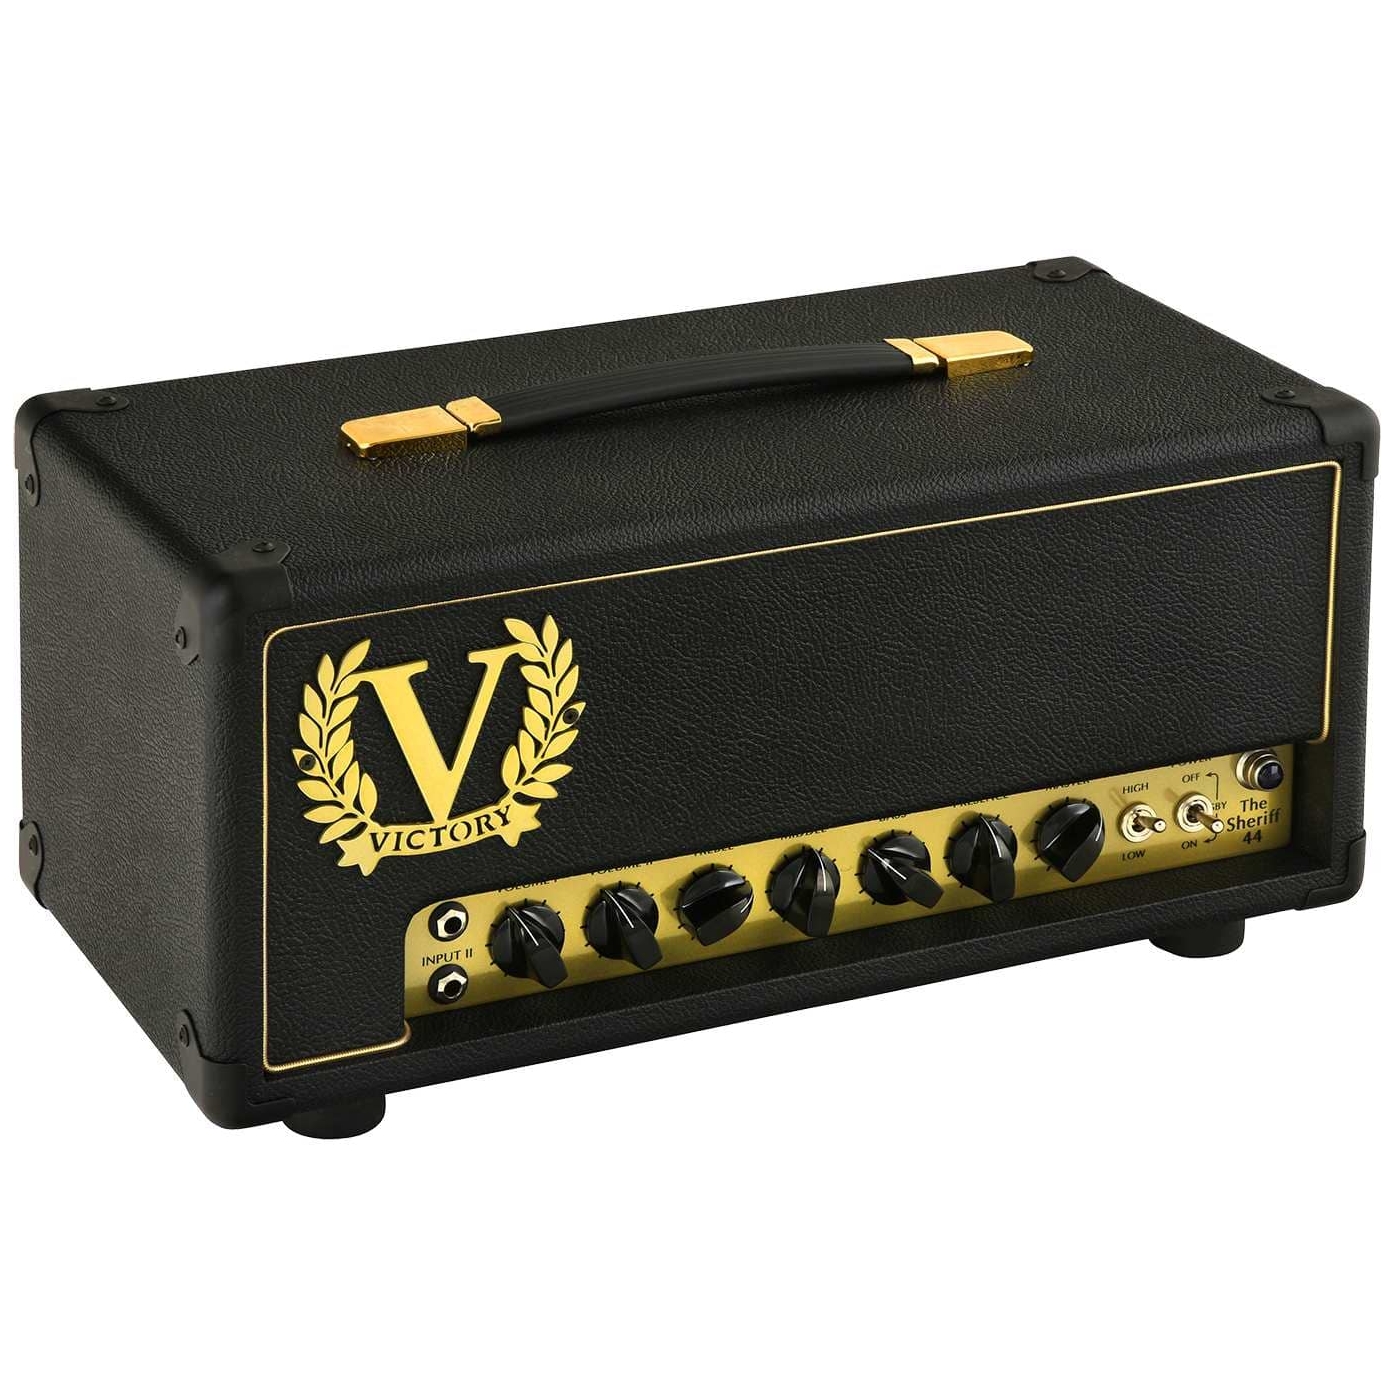 Victory Amps The Sheriff 44 B-Ware